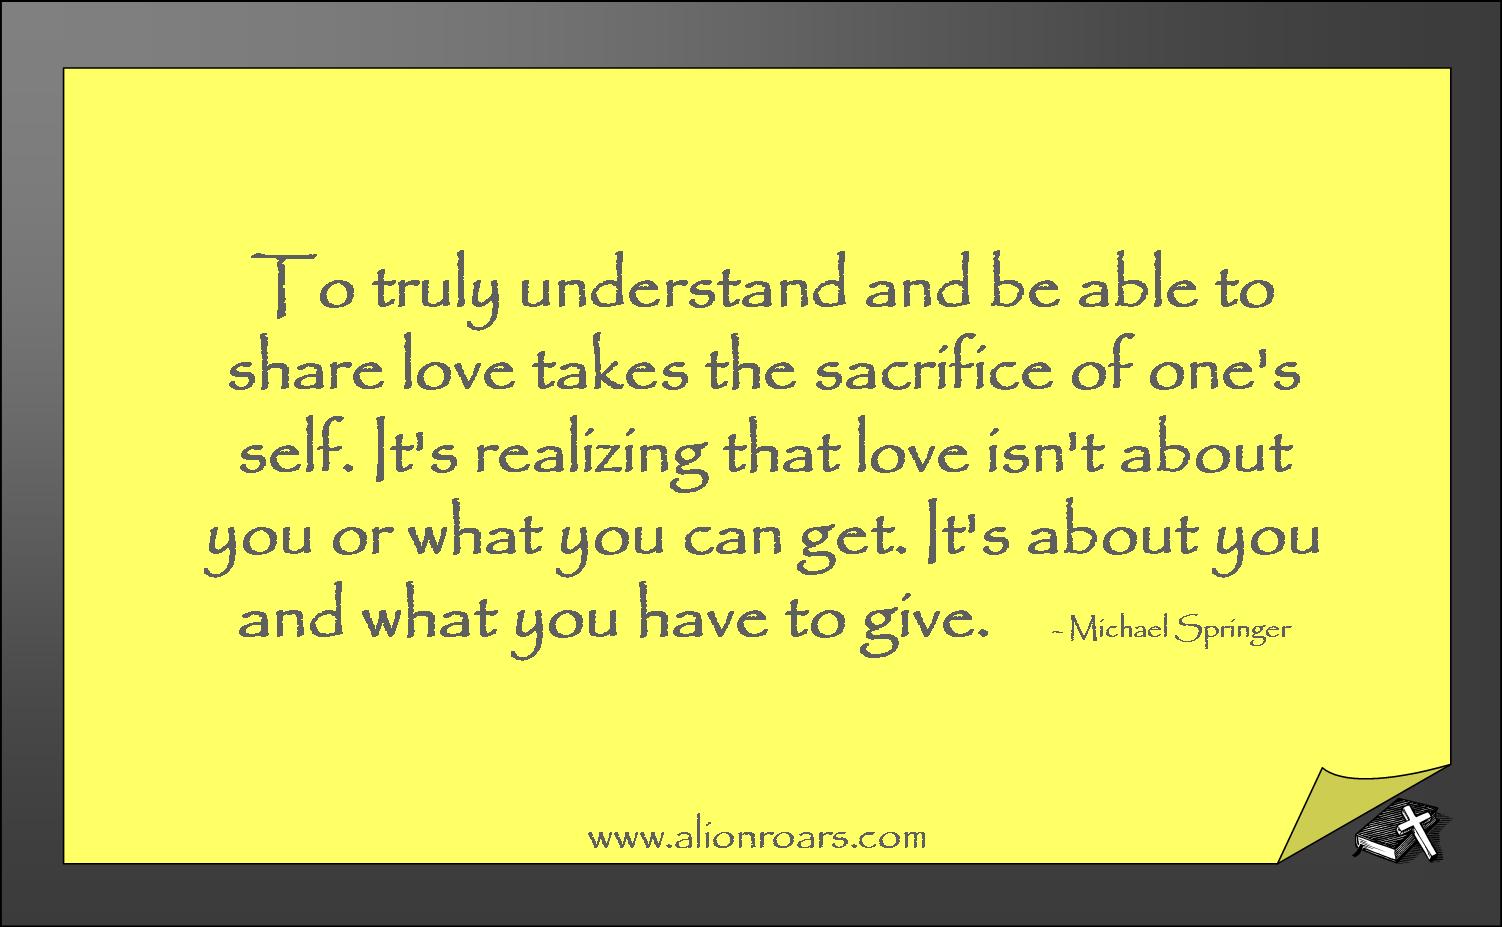 Quotes About Love And Sacrifice. QuotesGram